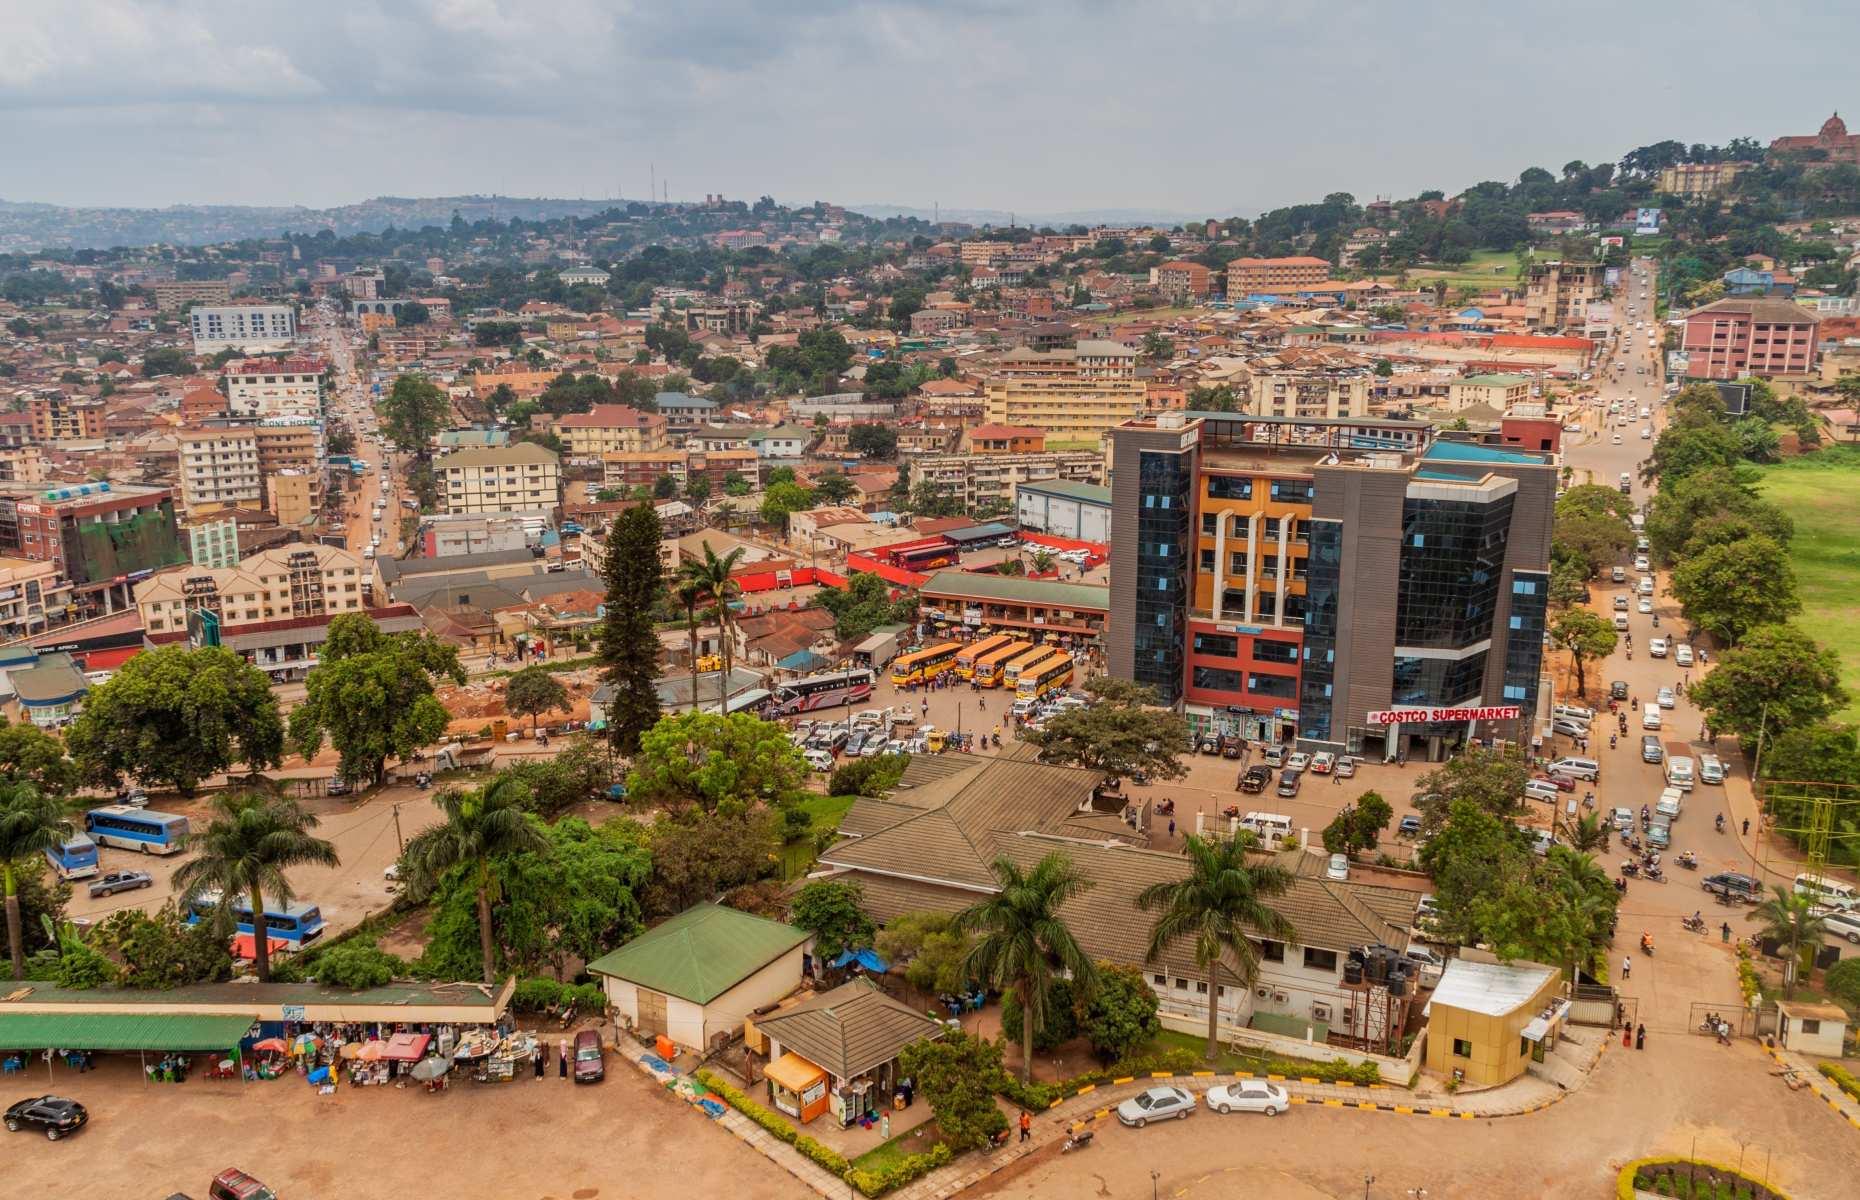 <p>Three pilot schemes have now been selected for the railway to be trialed: the first routes to open up will be Dar es Salaam in Tanzania to Kigali in Rwanda; Kampala in Uganda (pictured) to Bujumbura in Burundi; and Johannesburg in South Africa to Walvis Bay in Namibia, via Botswana's capital Gaborone. While the project has already seen significant delays and other practical challenges, the Uganda leg of the new Standard Gauge Railway is set to enter construction later in 2023.</p>  <p><a href="https://www.loveexploring.com/gallerylist/131832/the-worlds-best-overnight-trains"><strong>Now read on for the world's best overnight trains</strong></a></p>